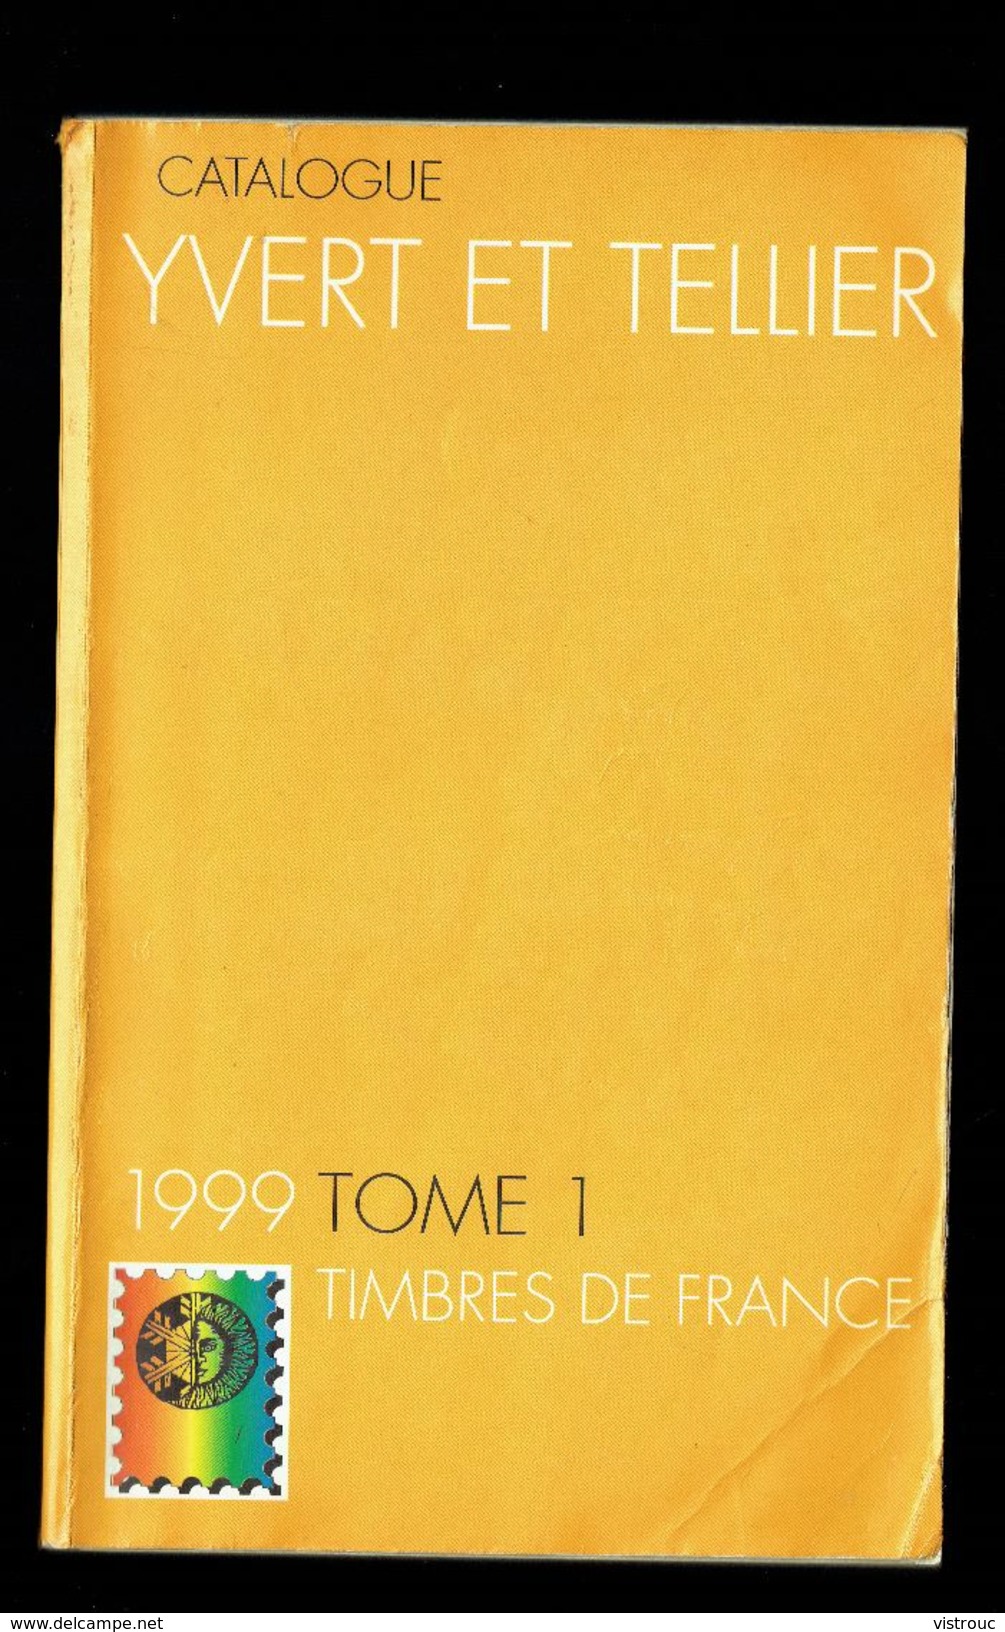 Catalogue Y. & T. - Edition 1999, Tome 1 - FRANCE. - Frankreich